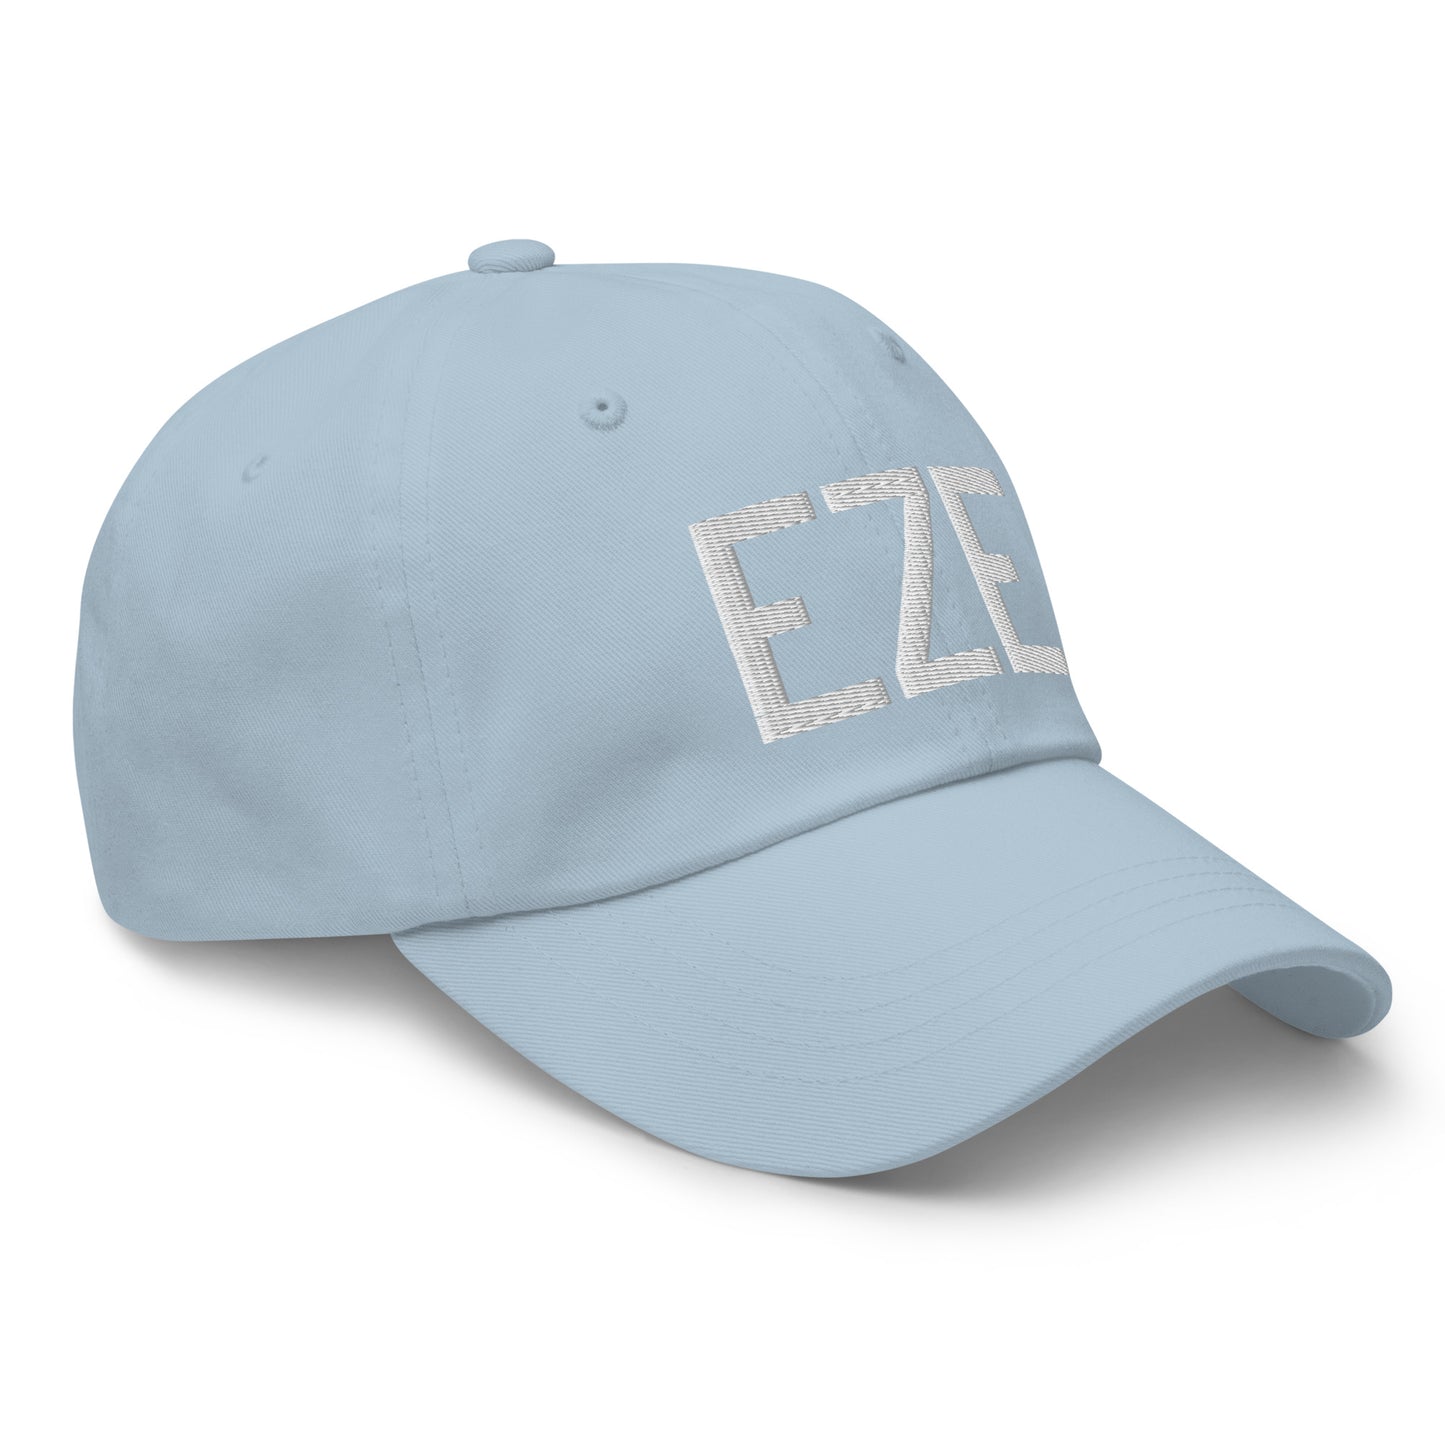 Airport Code Baseball Cap - White • EZE Buenos Aires • YHM Designs - Image 29